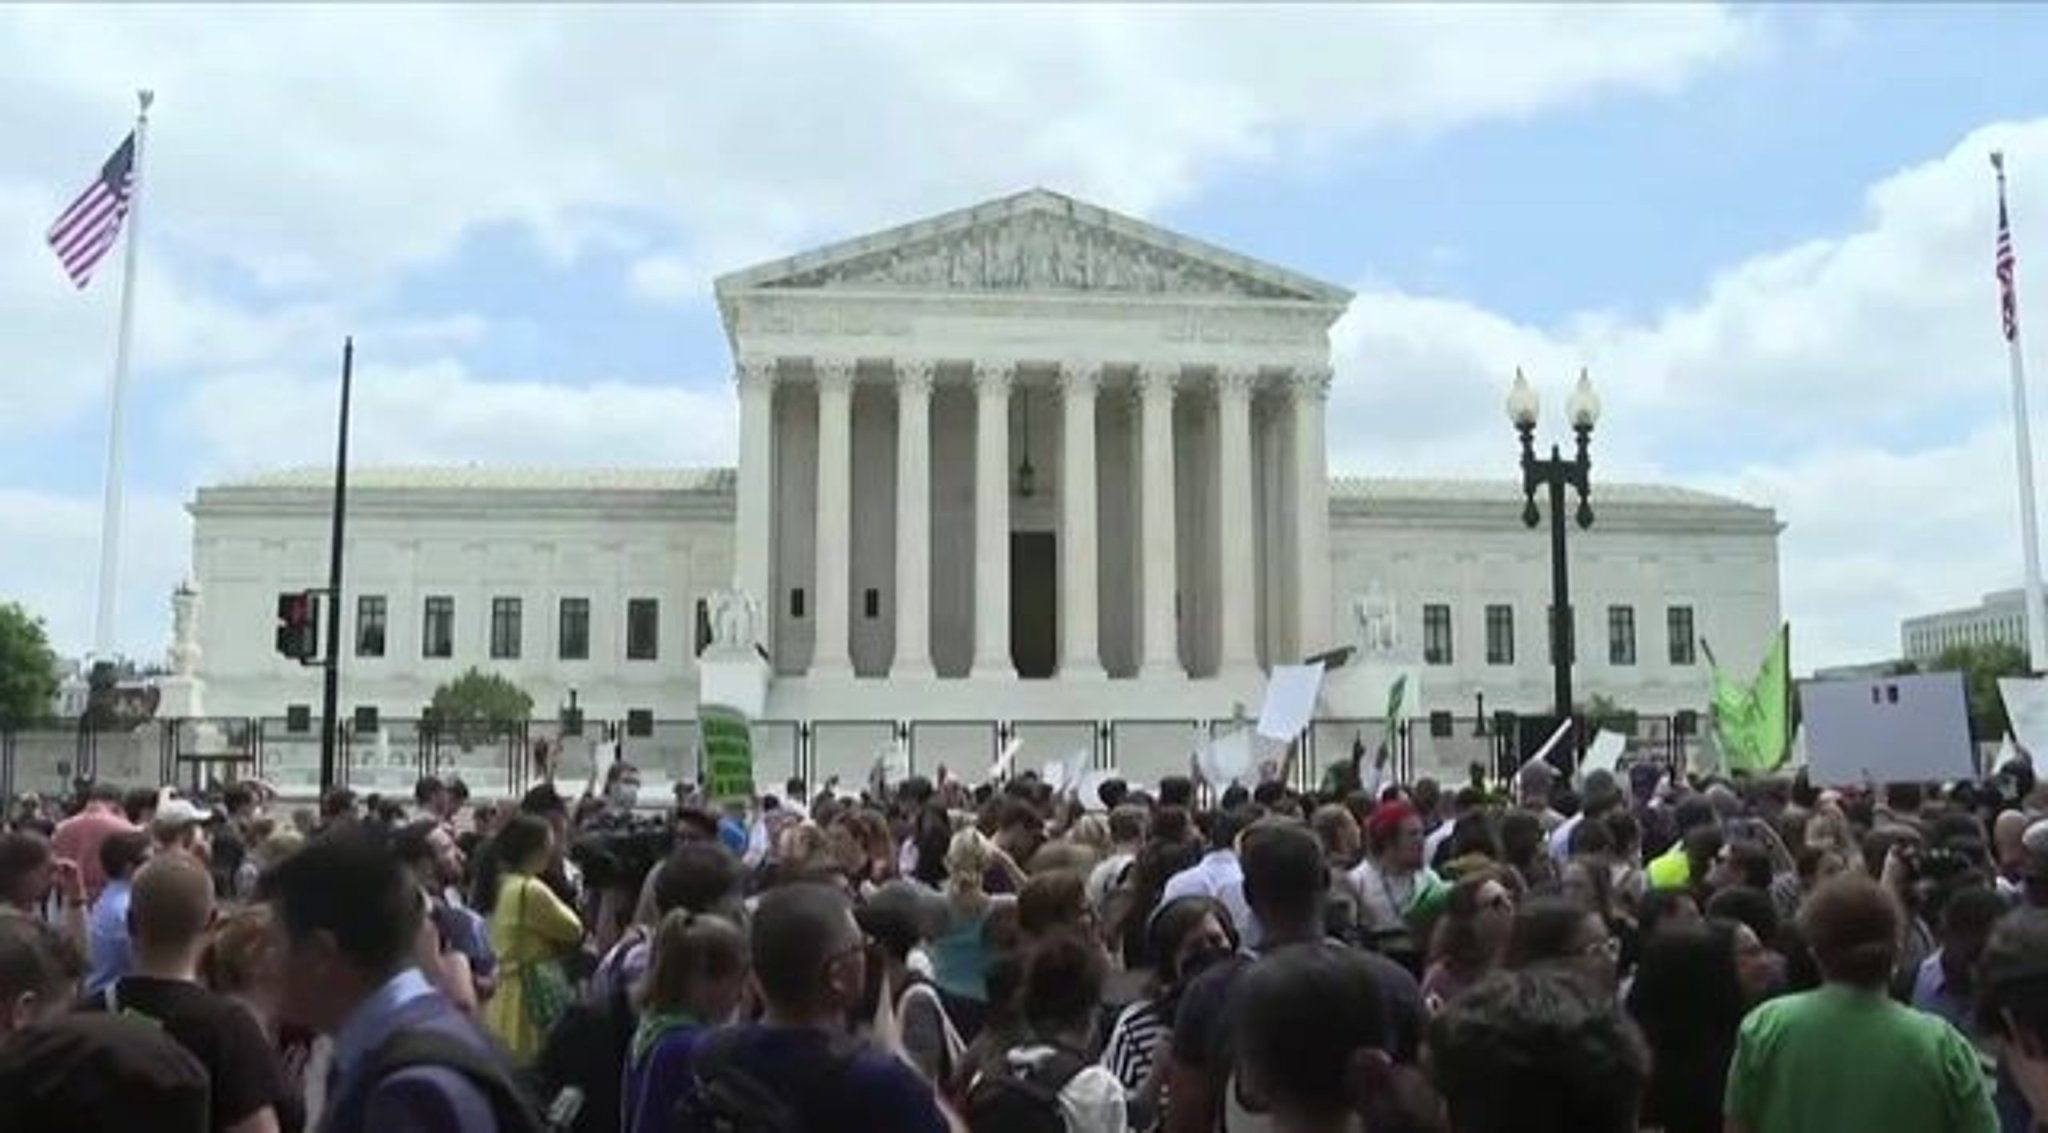 SCOTUS Overturns Roe v. Wade: Reactions, Opinions, & Implications